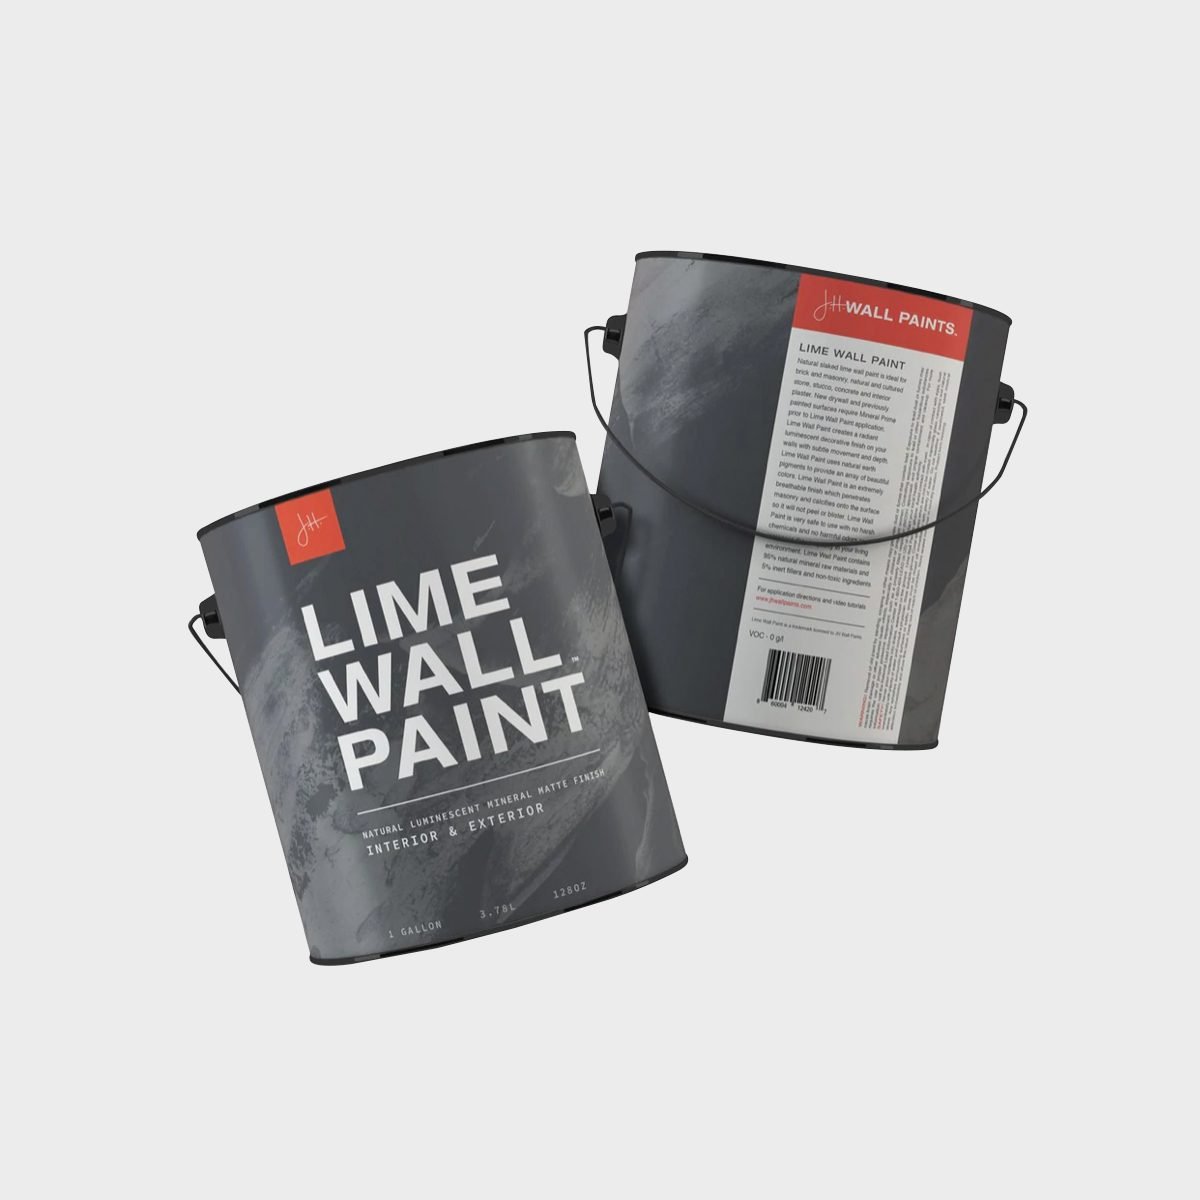 Jh Lime Wall Paint Is A Stan Ecomm Jhwallpaint.com